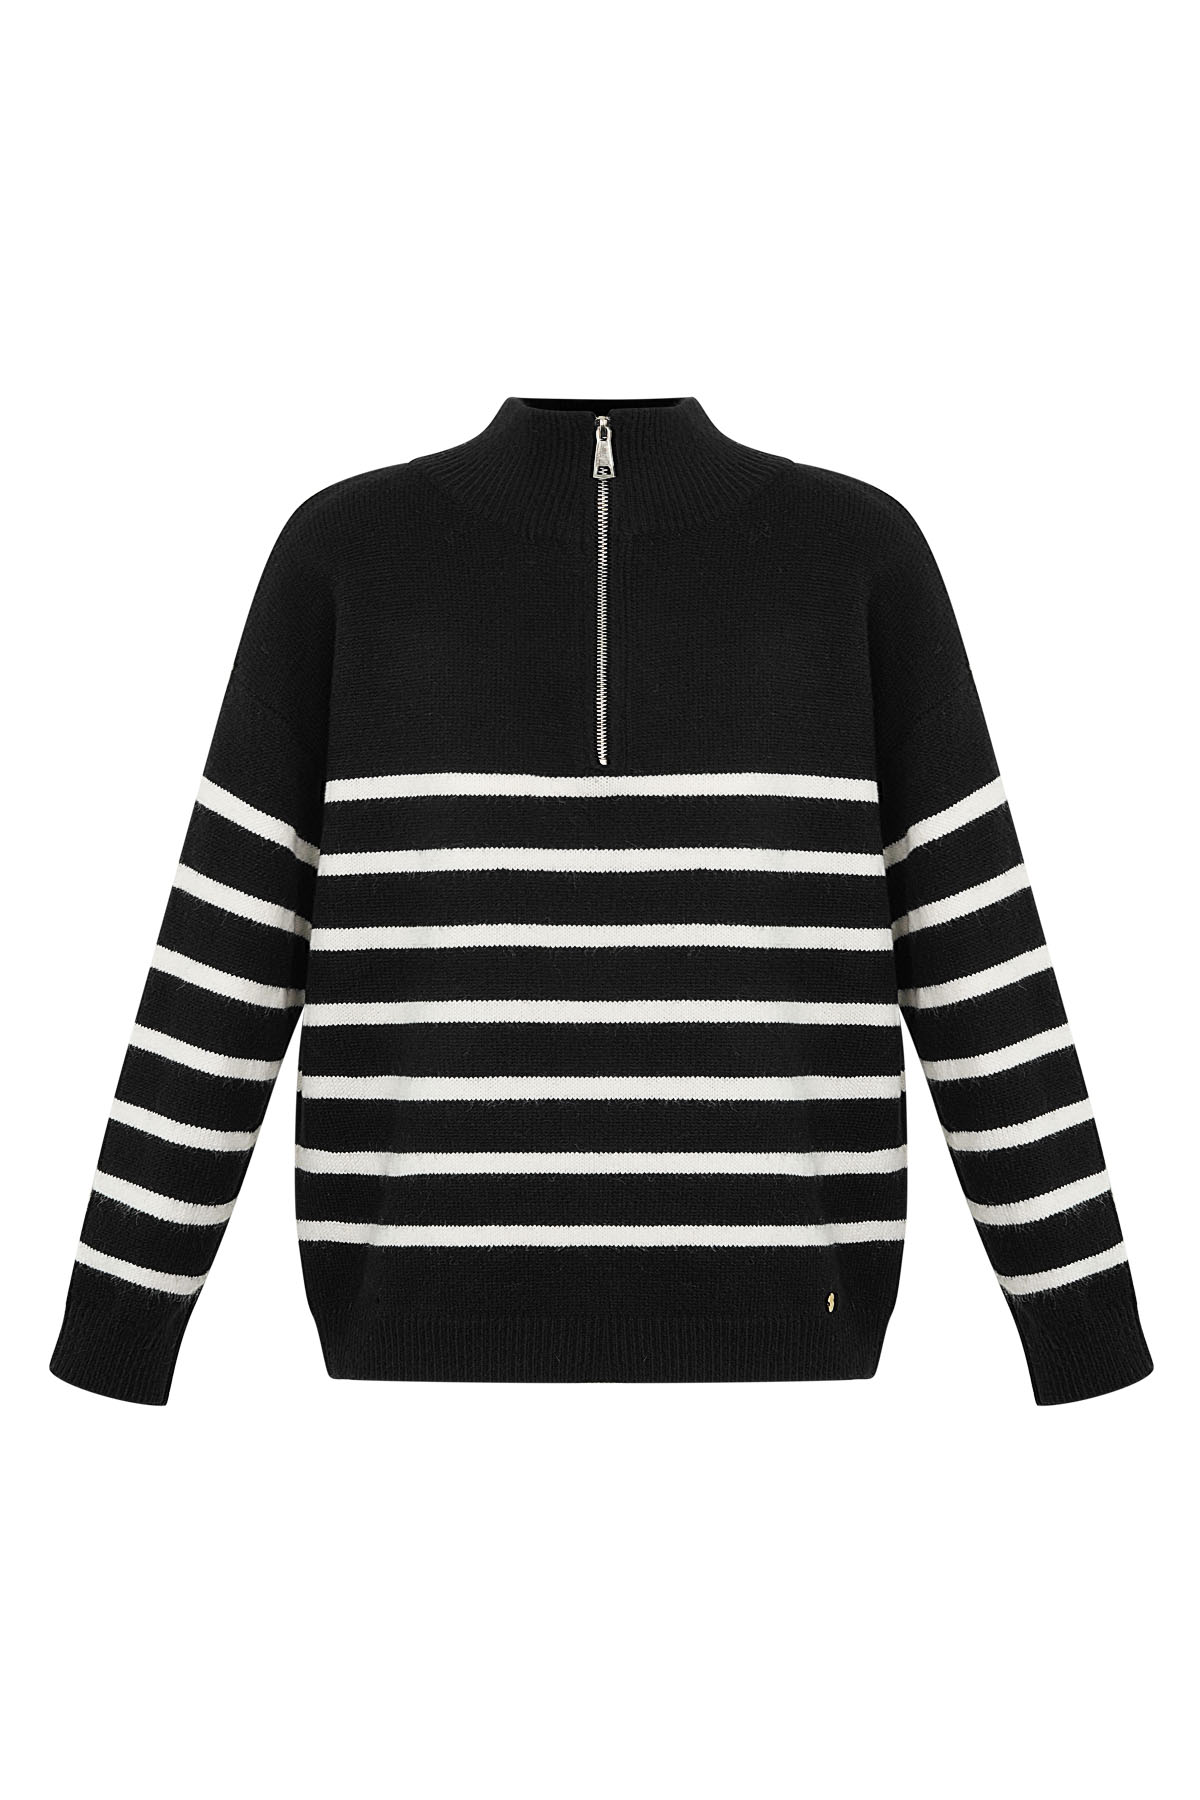 Knitted sweater stripes with zipper - beige black - LXL h5 